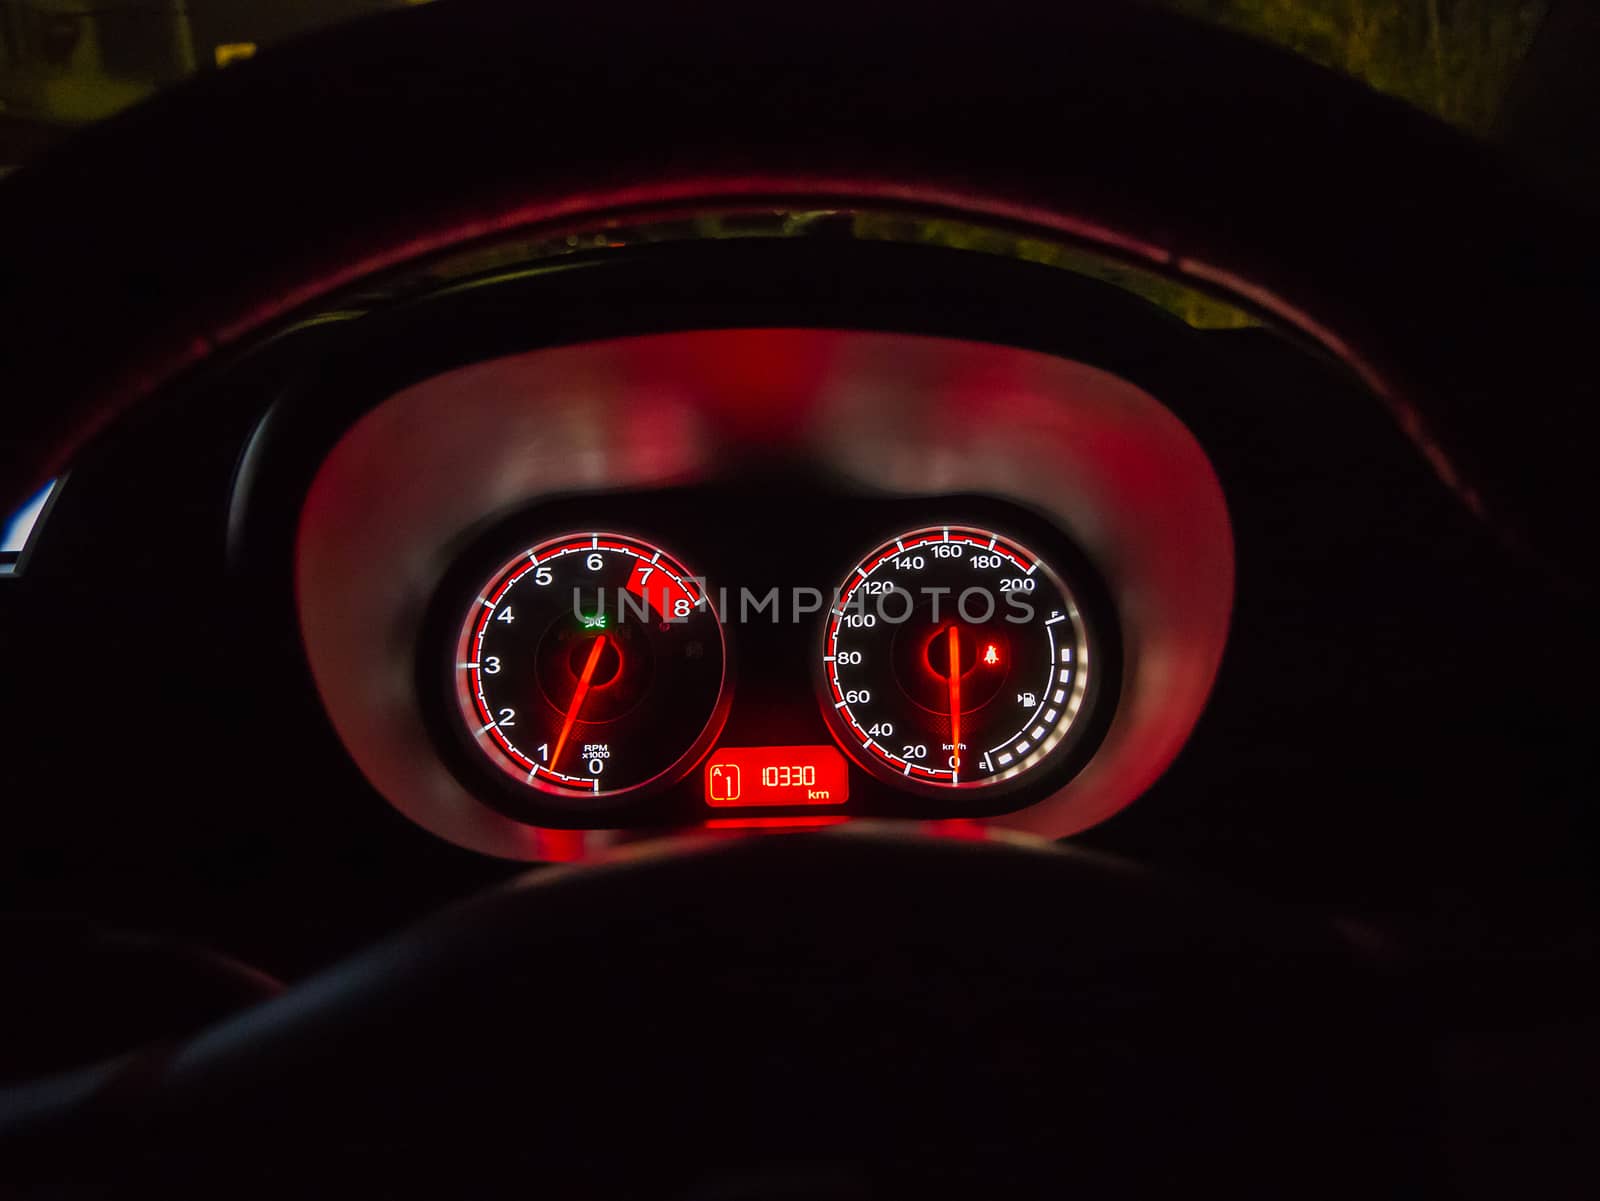 A close up of the front instrument panel or dashboard of a modern automobile.